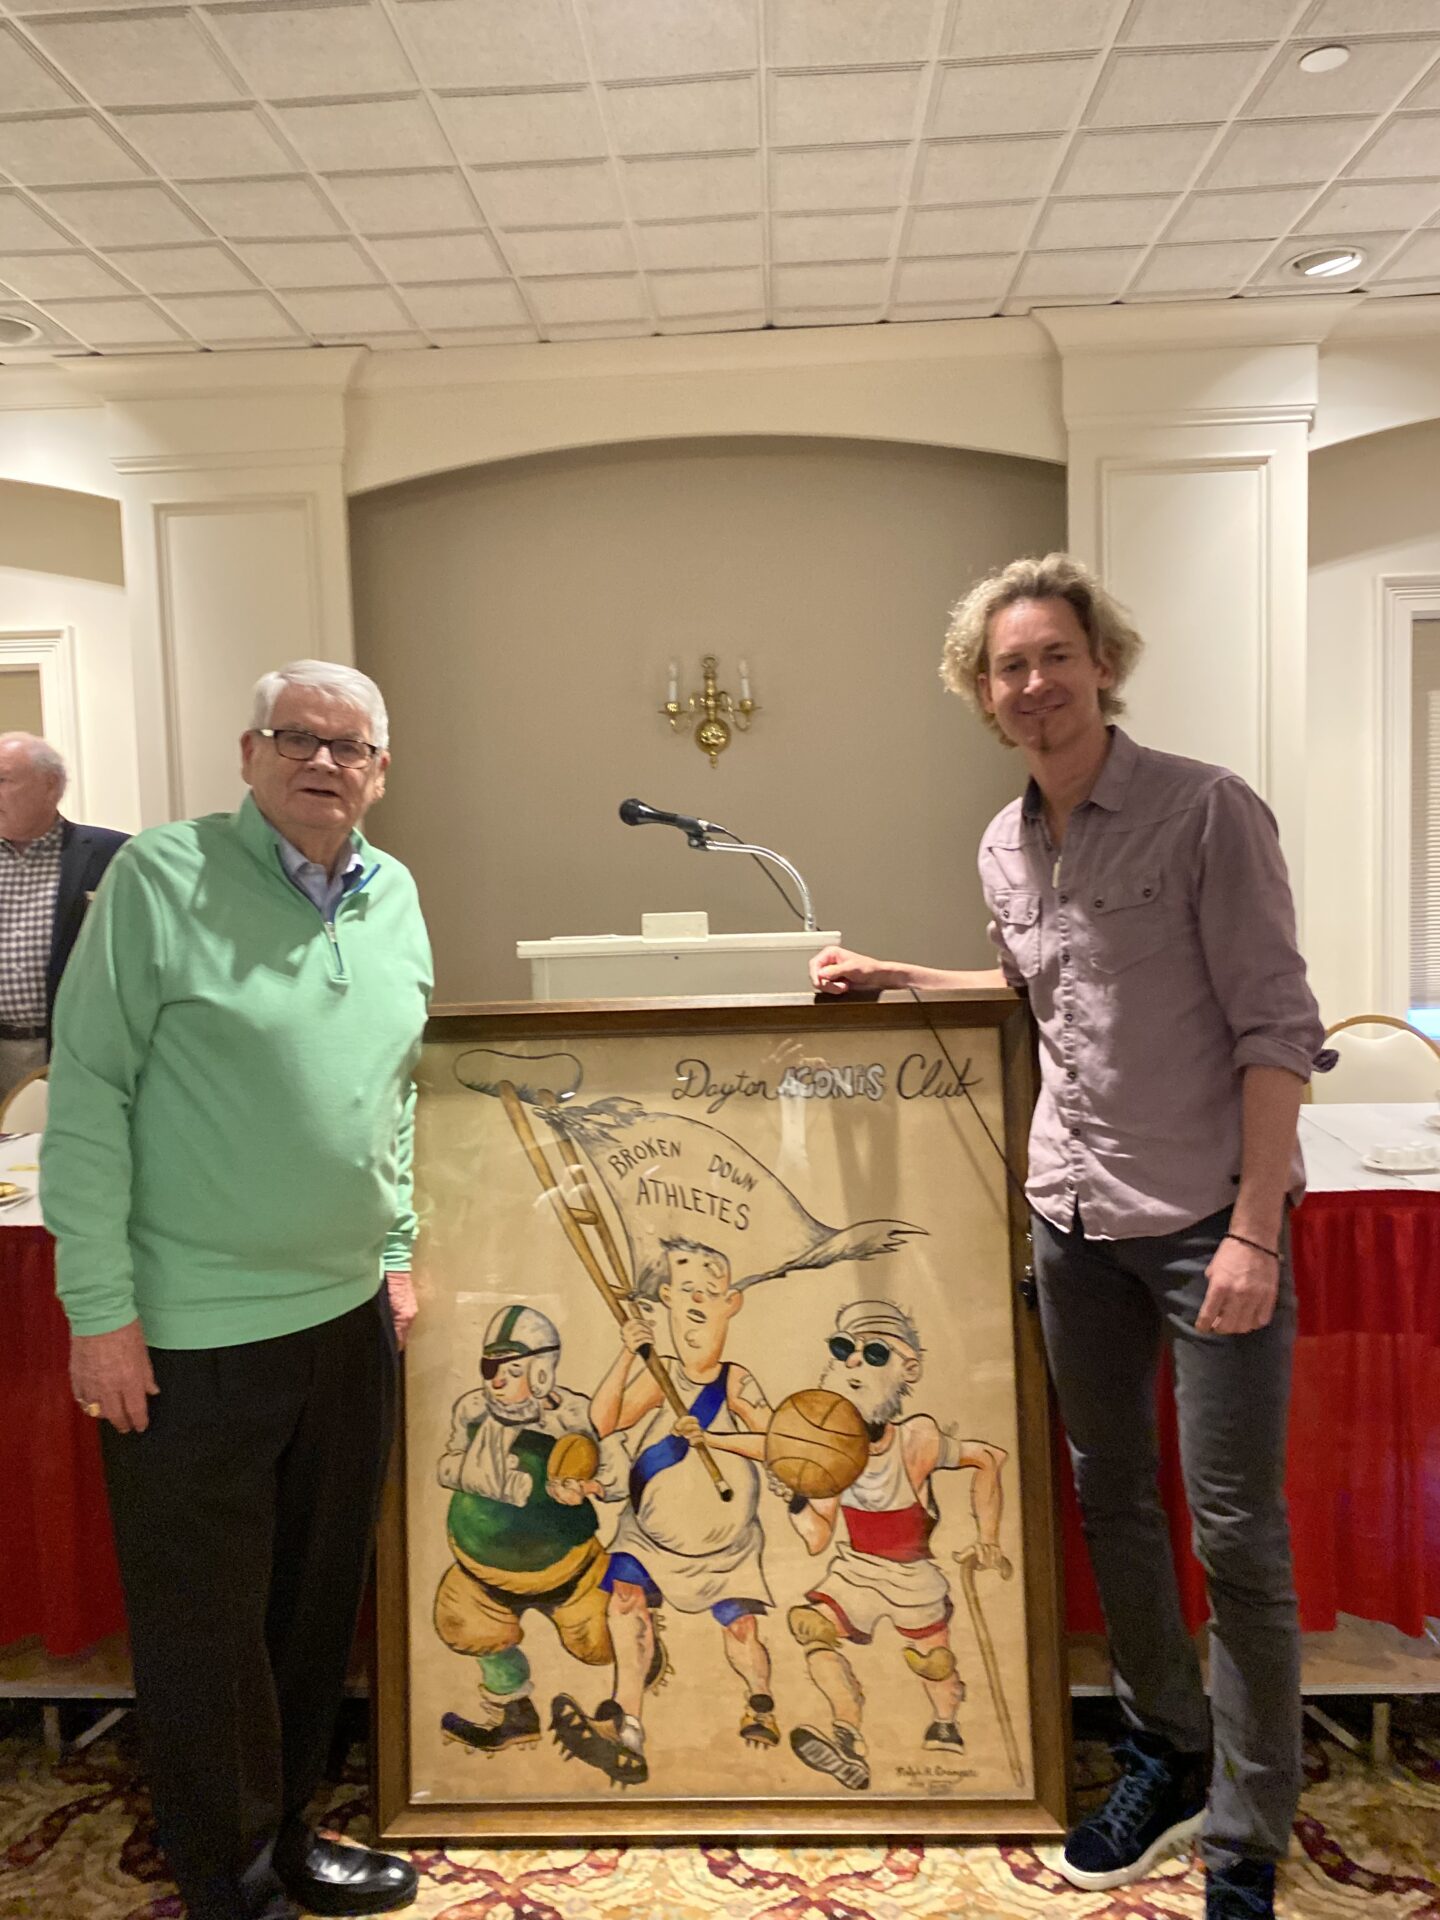 Two men standing next to a painting of three cartoon characters.